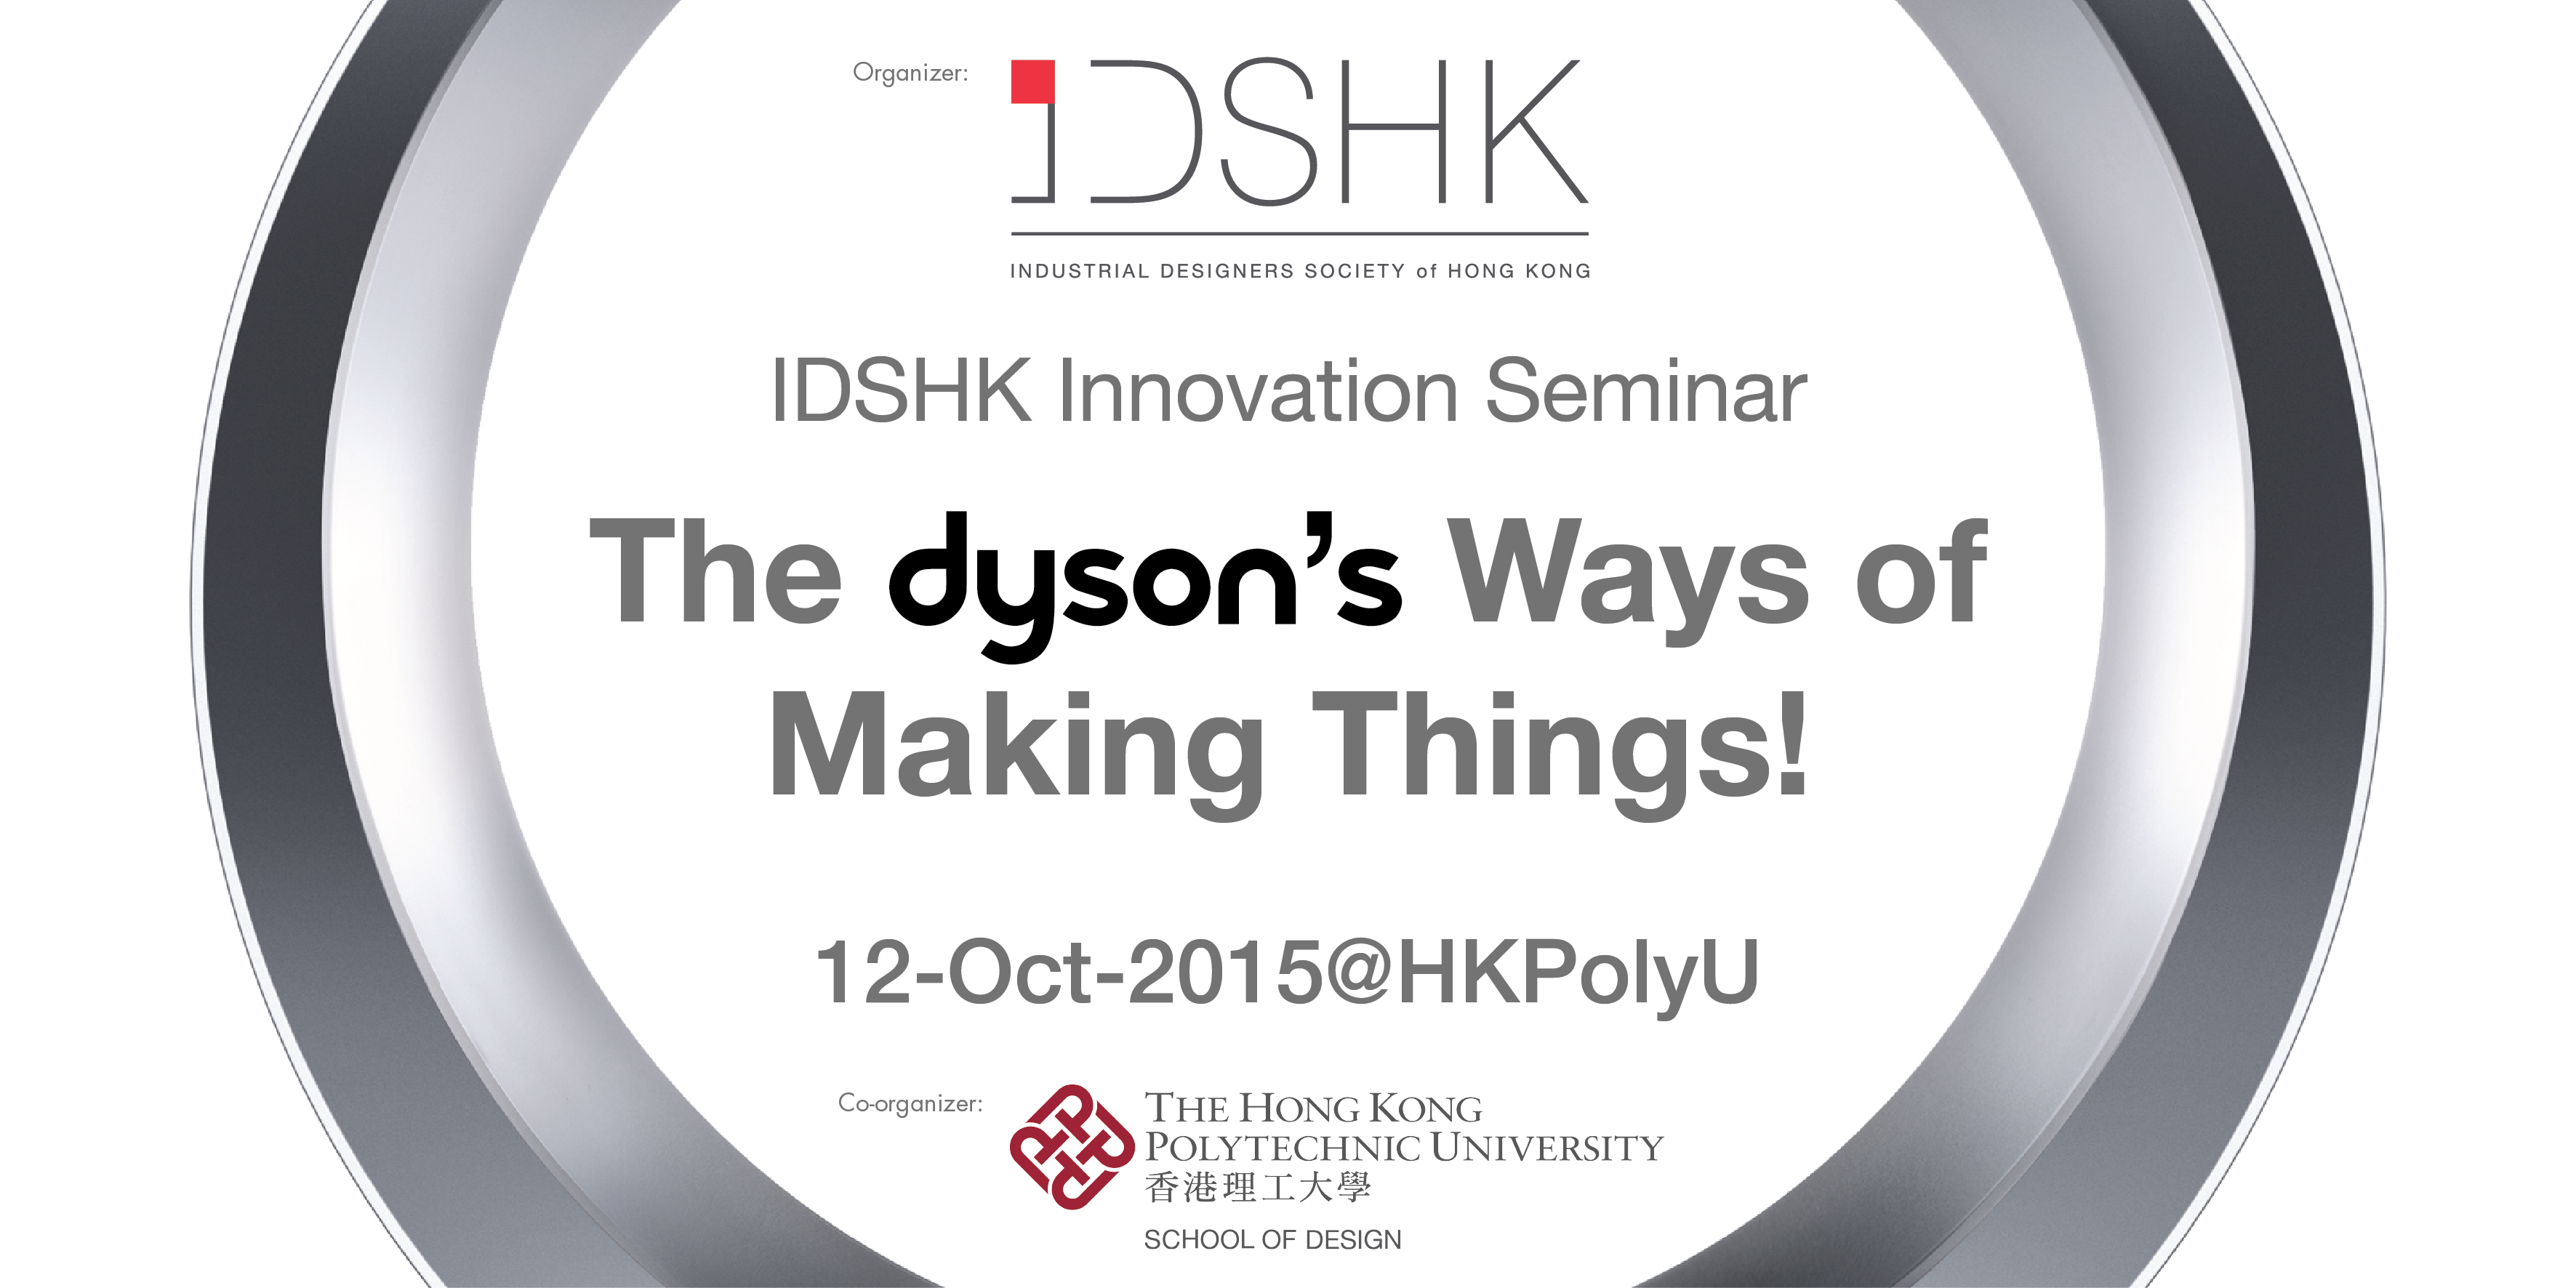 IDSHK Innovation Seminar - The Dyson's Way of Making Things!